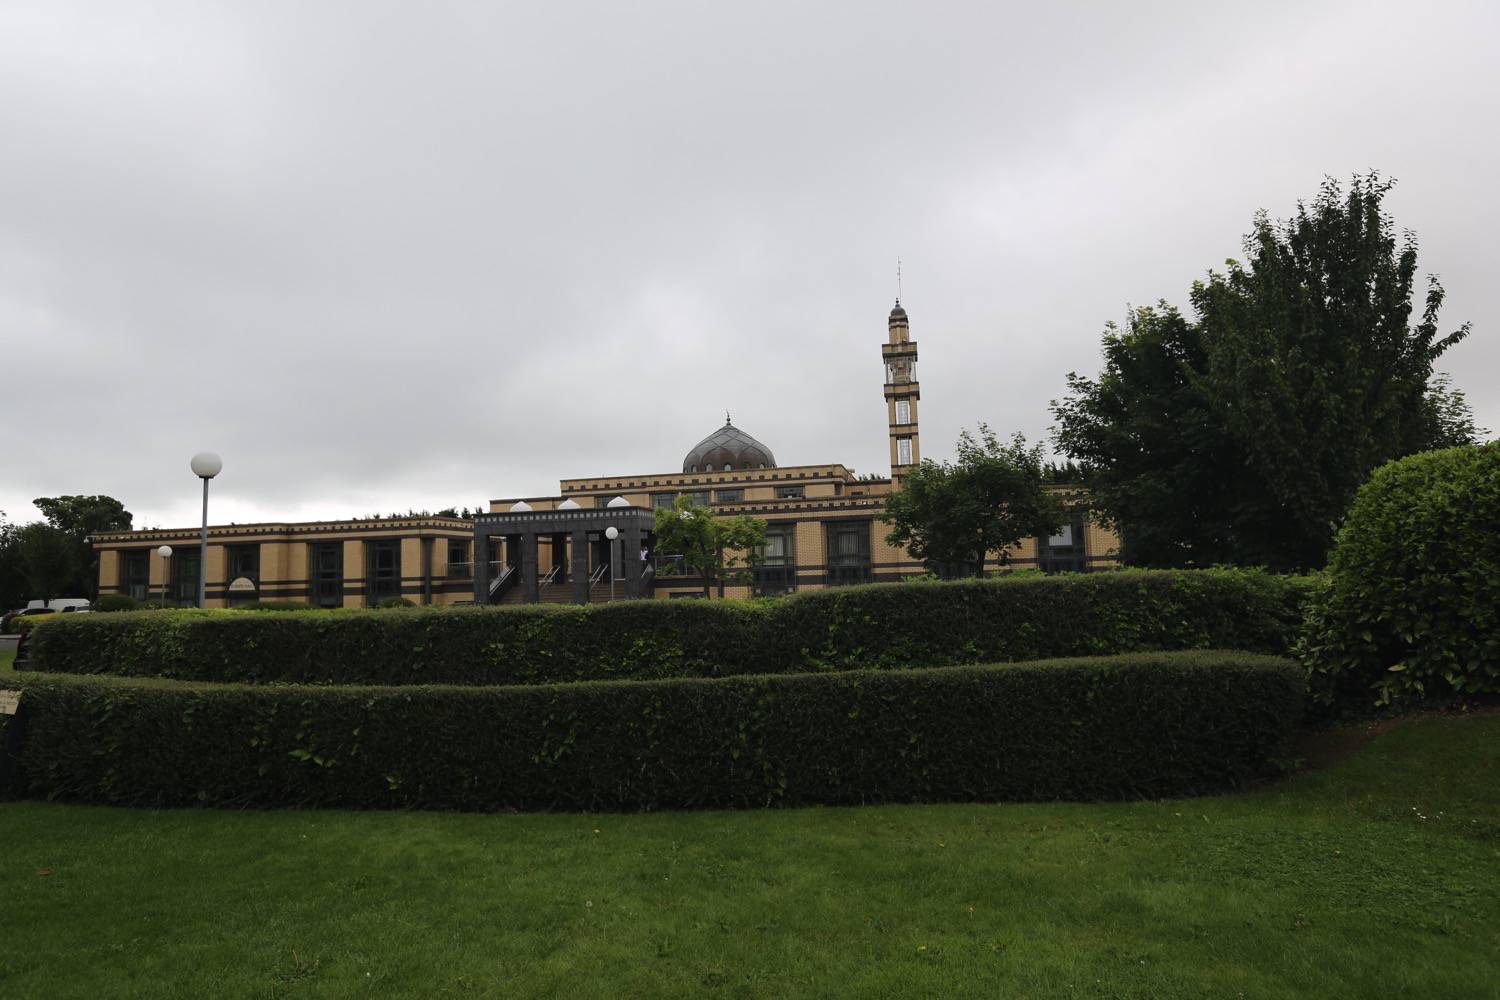 View of the mosque from the entry drive